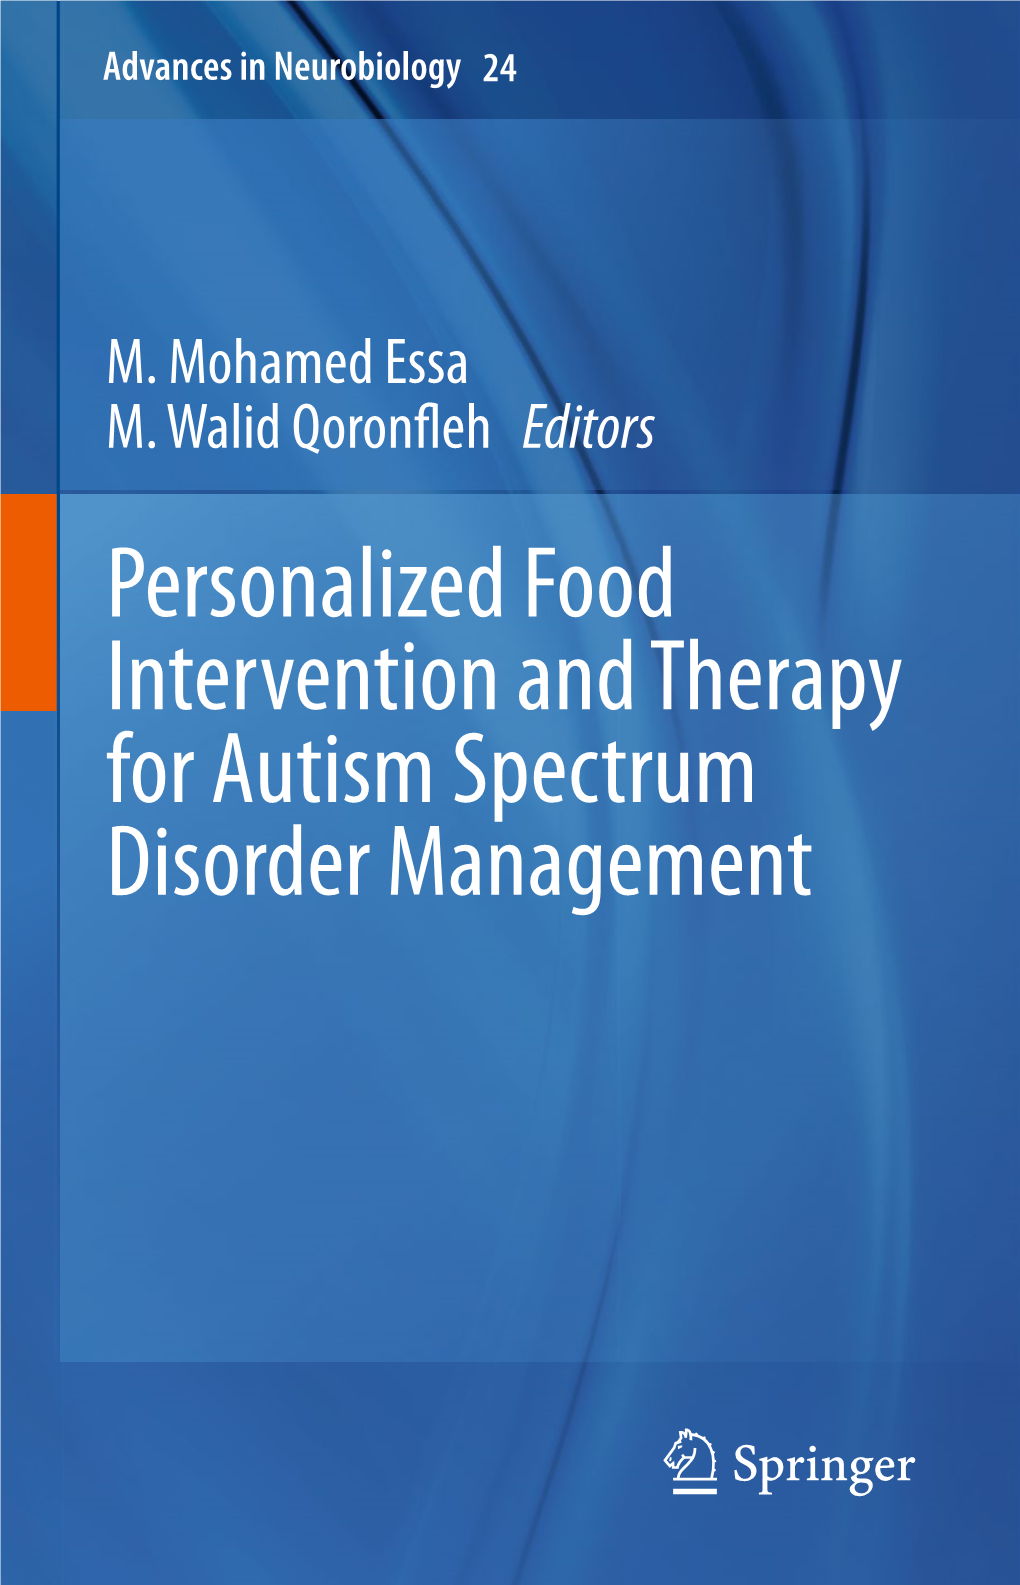 Personalized Food Intervention and Therapy for Autism Spectrum Disorder Management Advances in Neurobiology